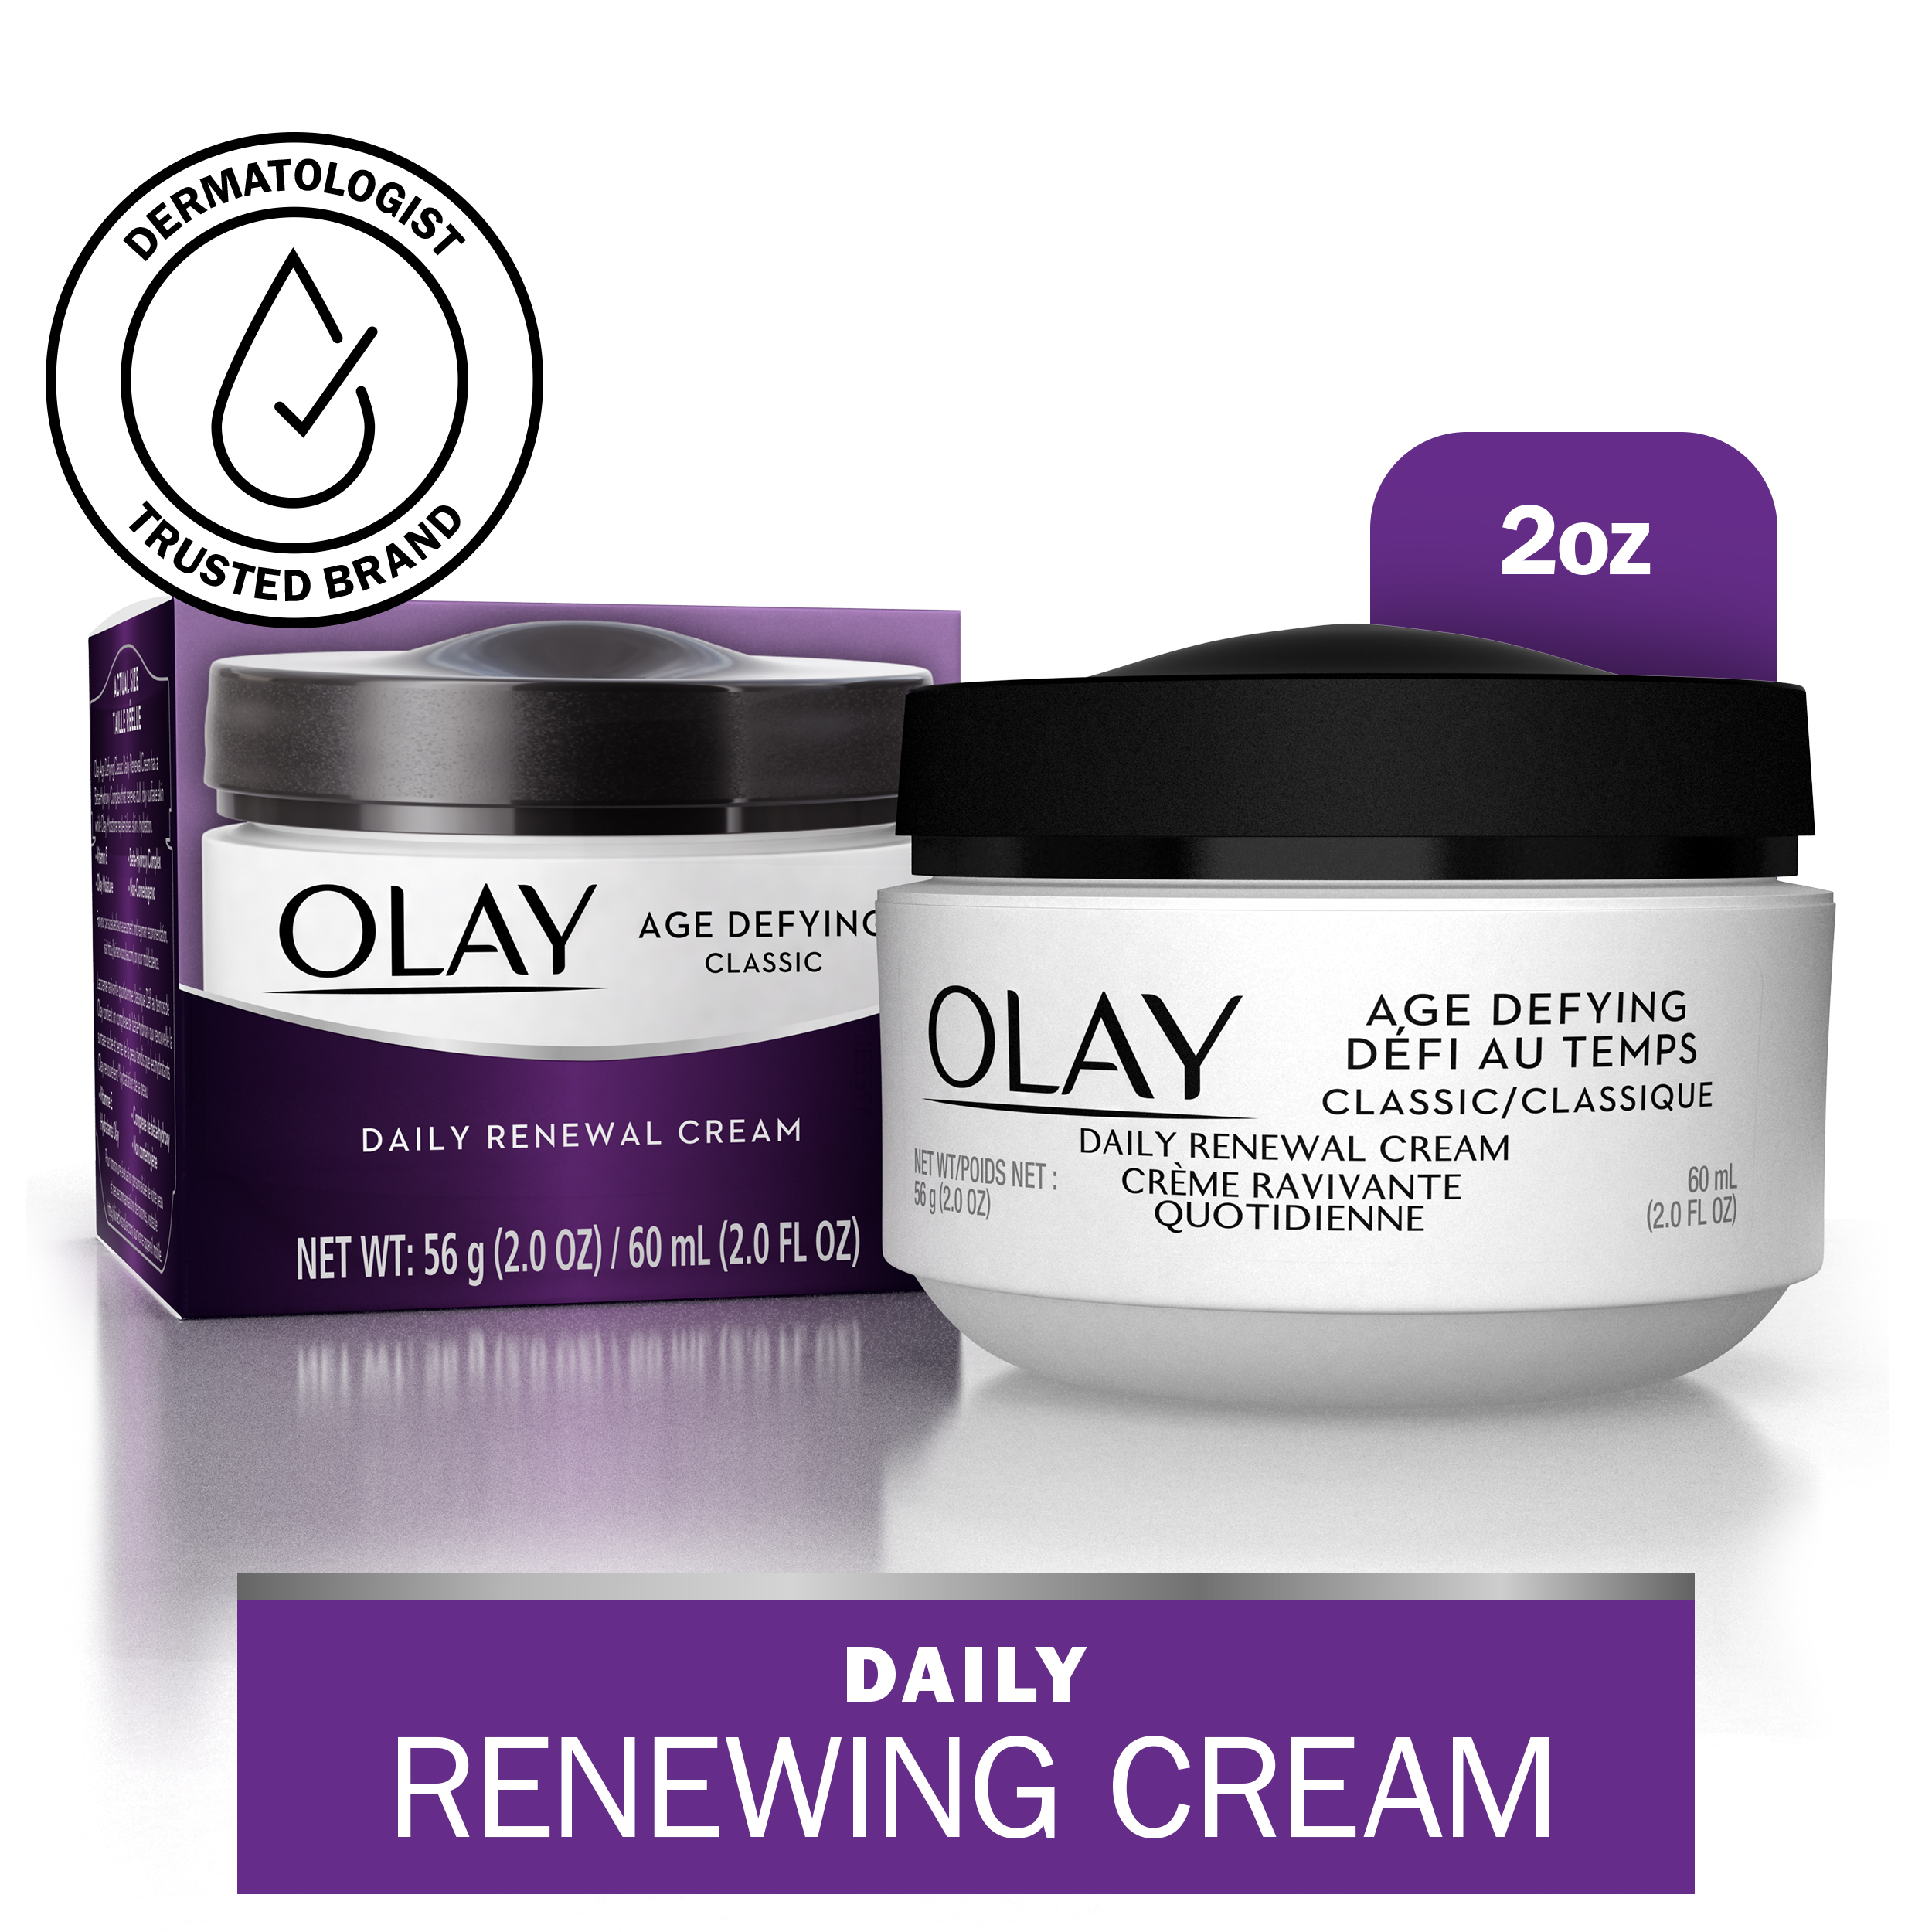 Olay Age Defying Classic Daily Renewal Cream, Face Moisturizer for Dull Combination Skin, 2.0 fl oz - image 1 of 10